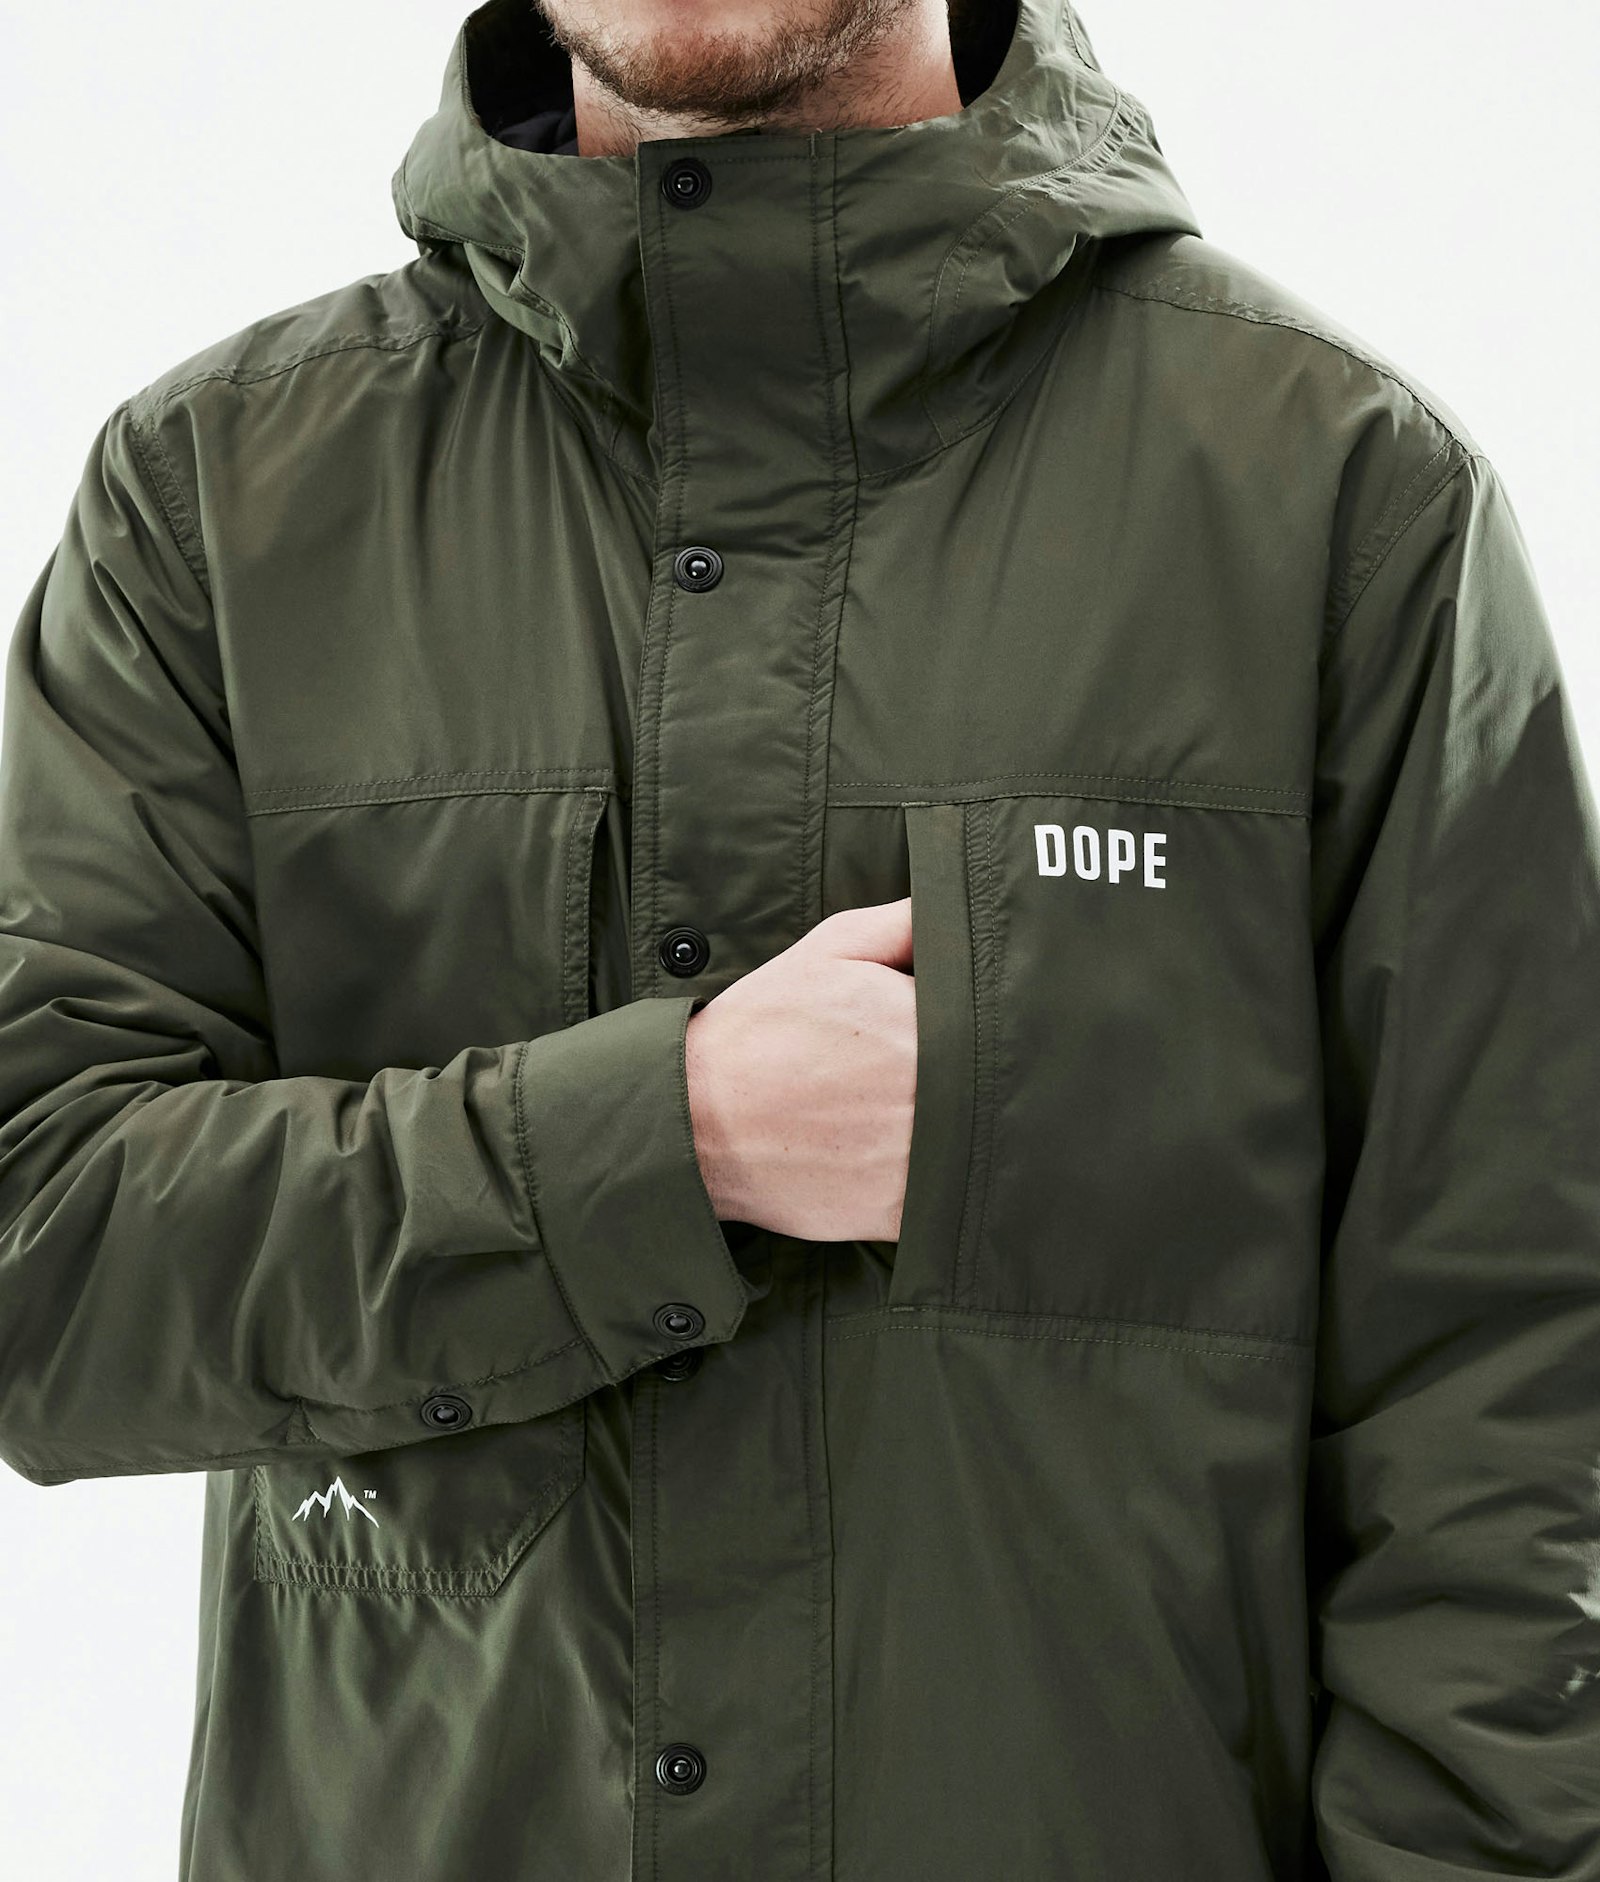 Dope Insulated Veste - Couche intermédiaire Homme Olive Green Renewed